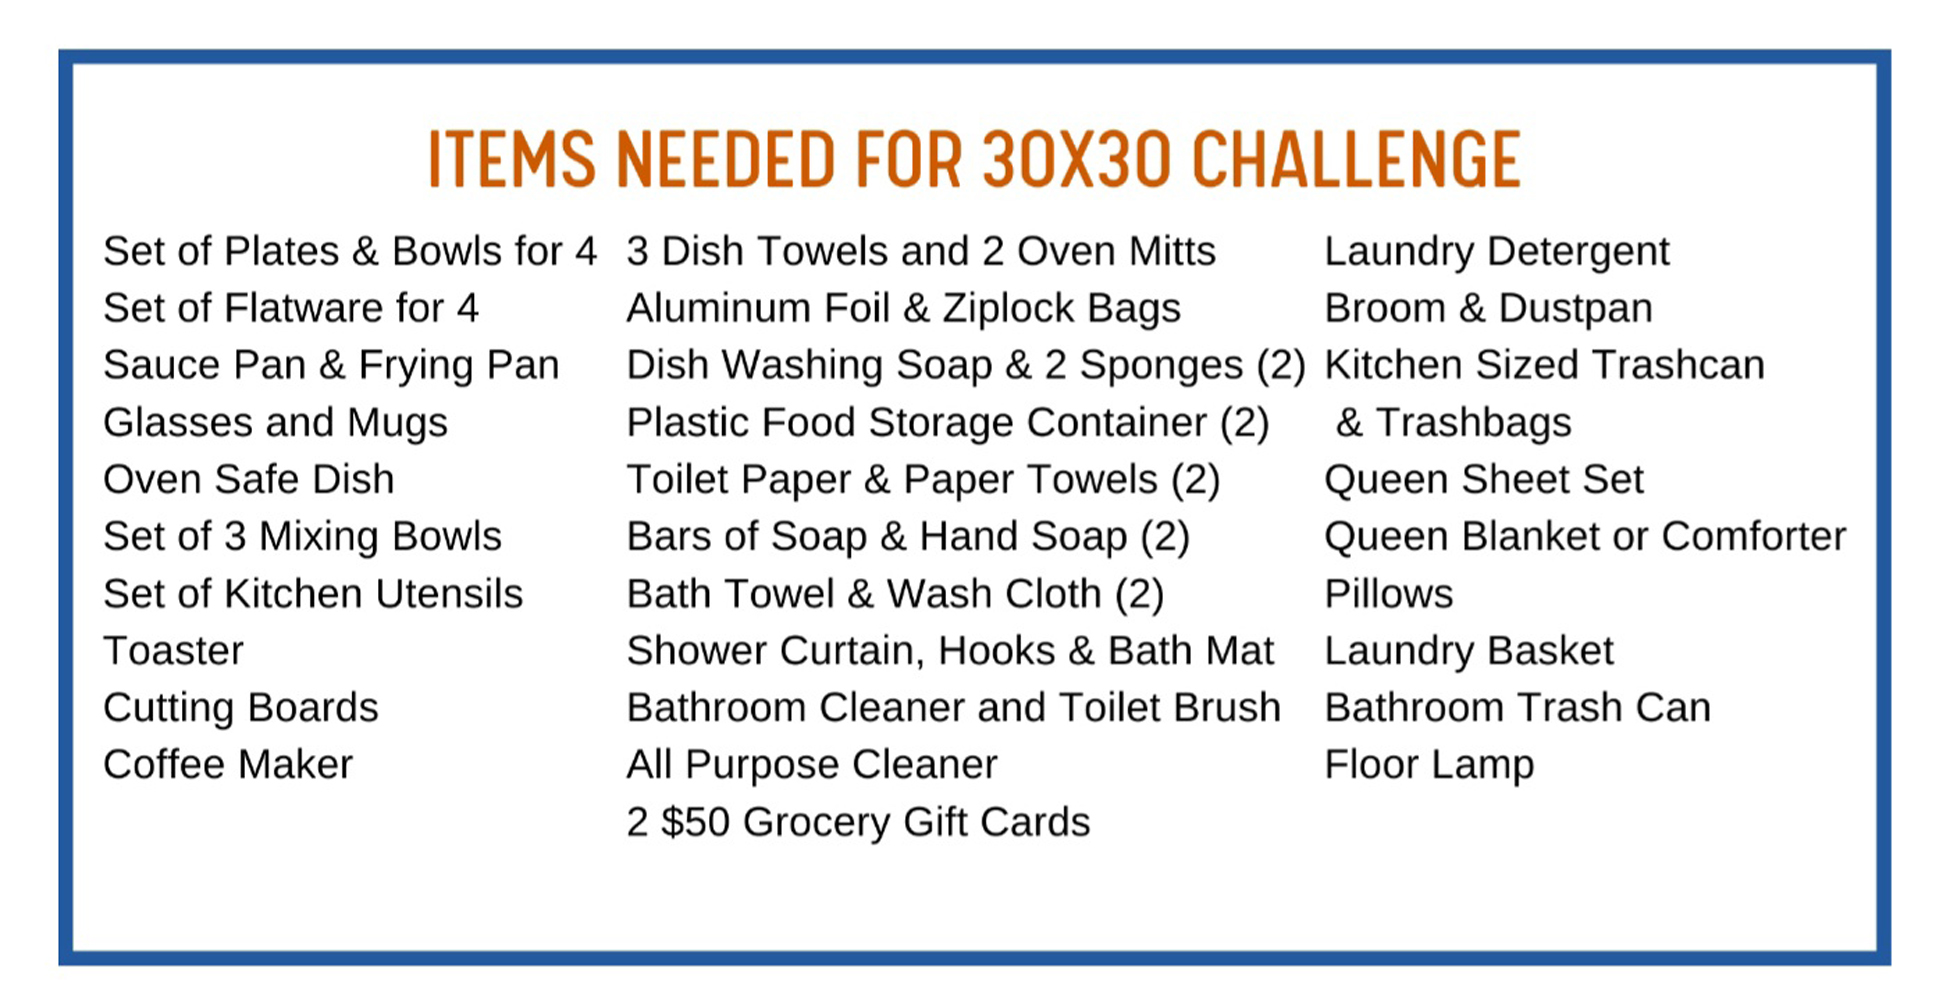 Items needed MCCH